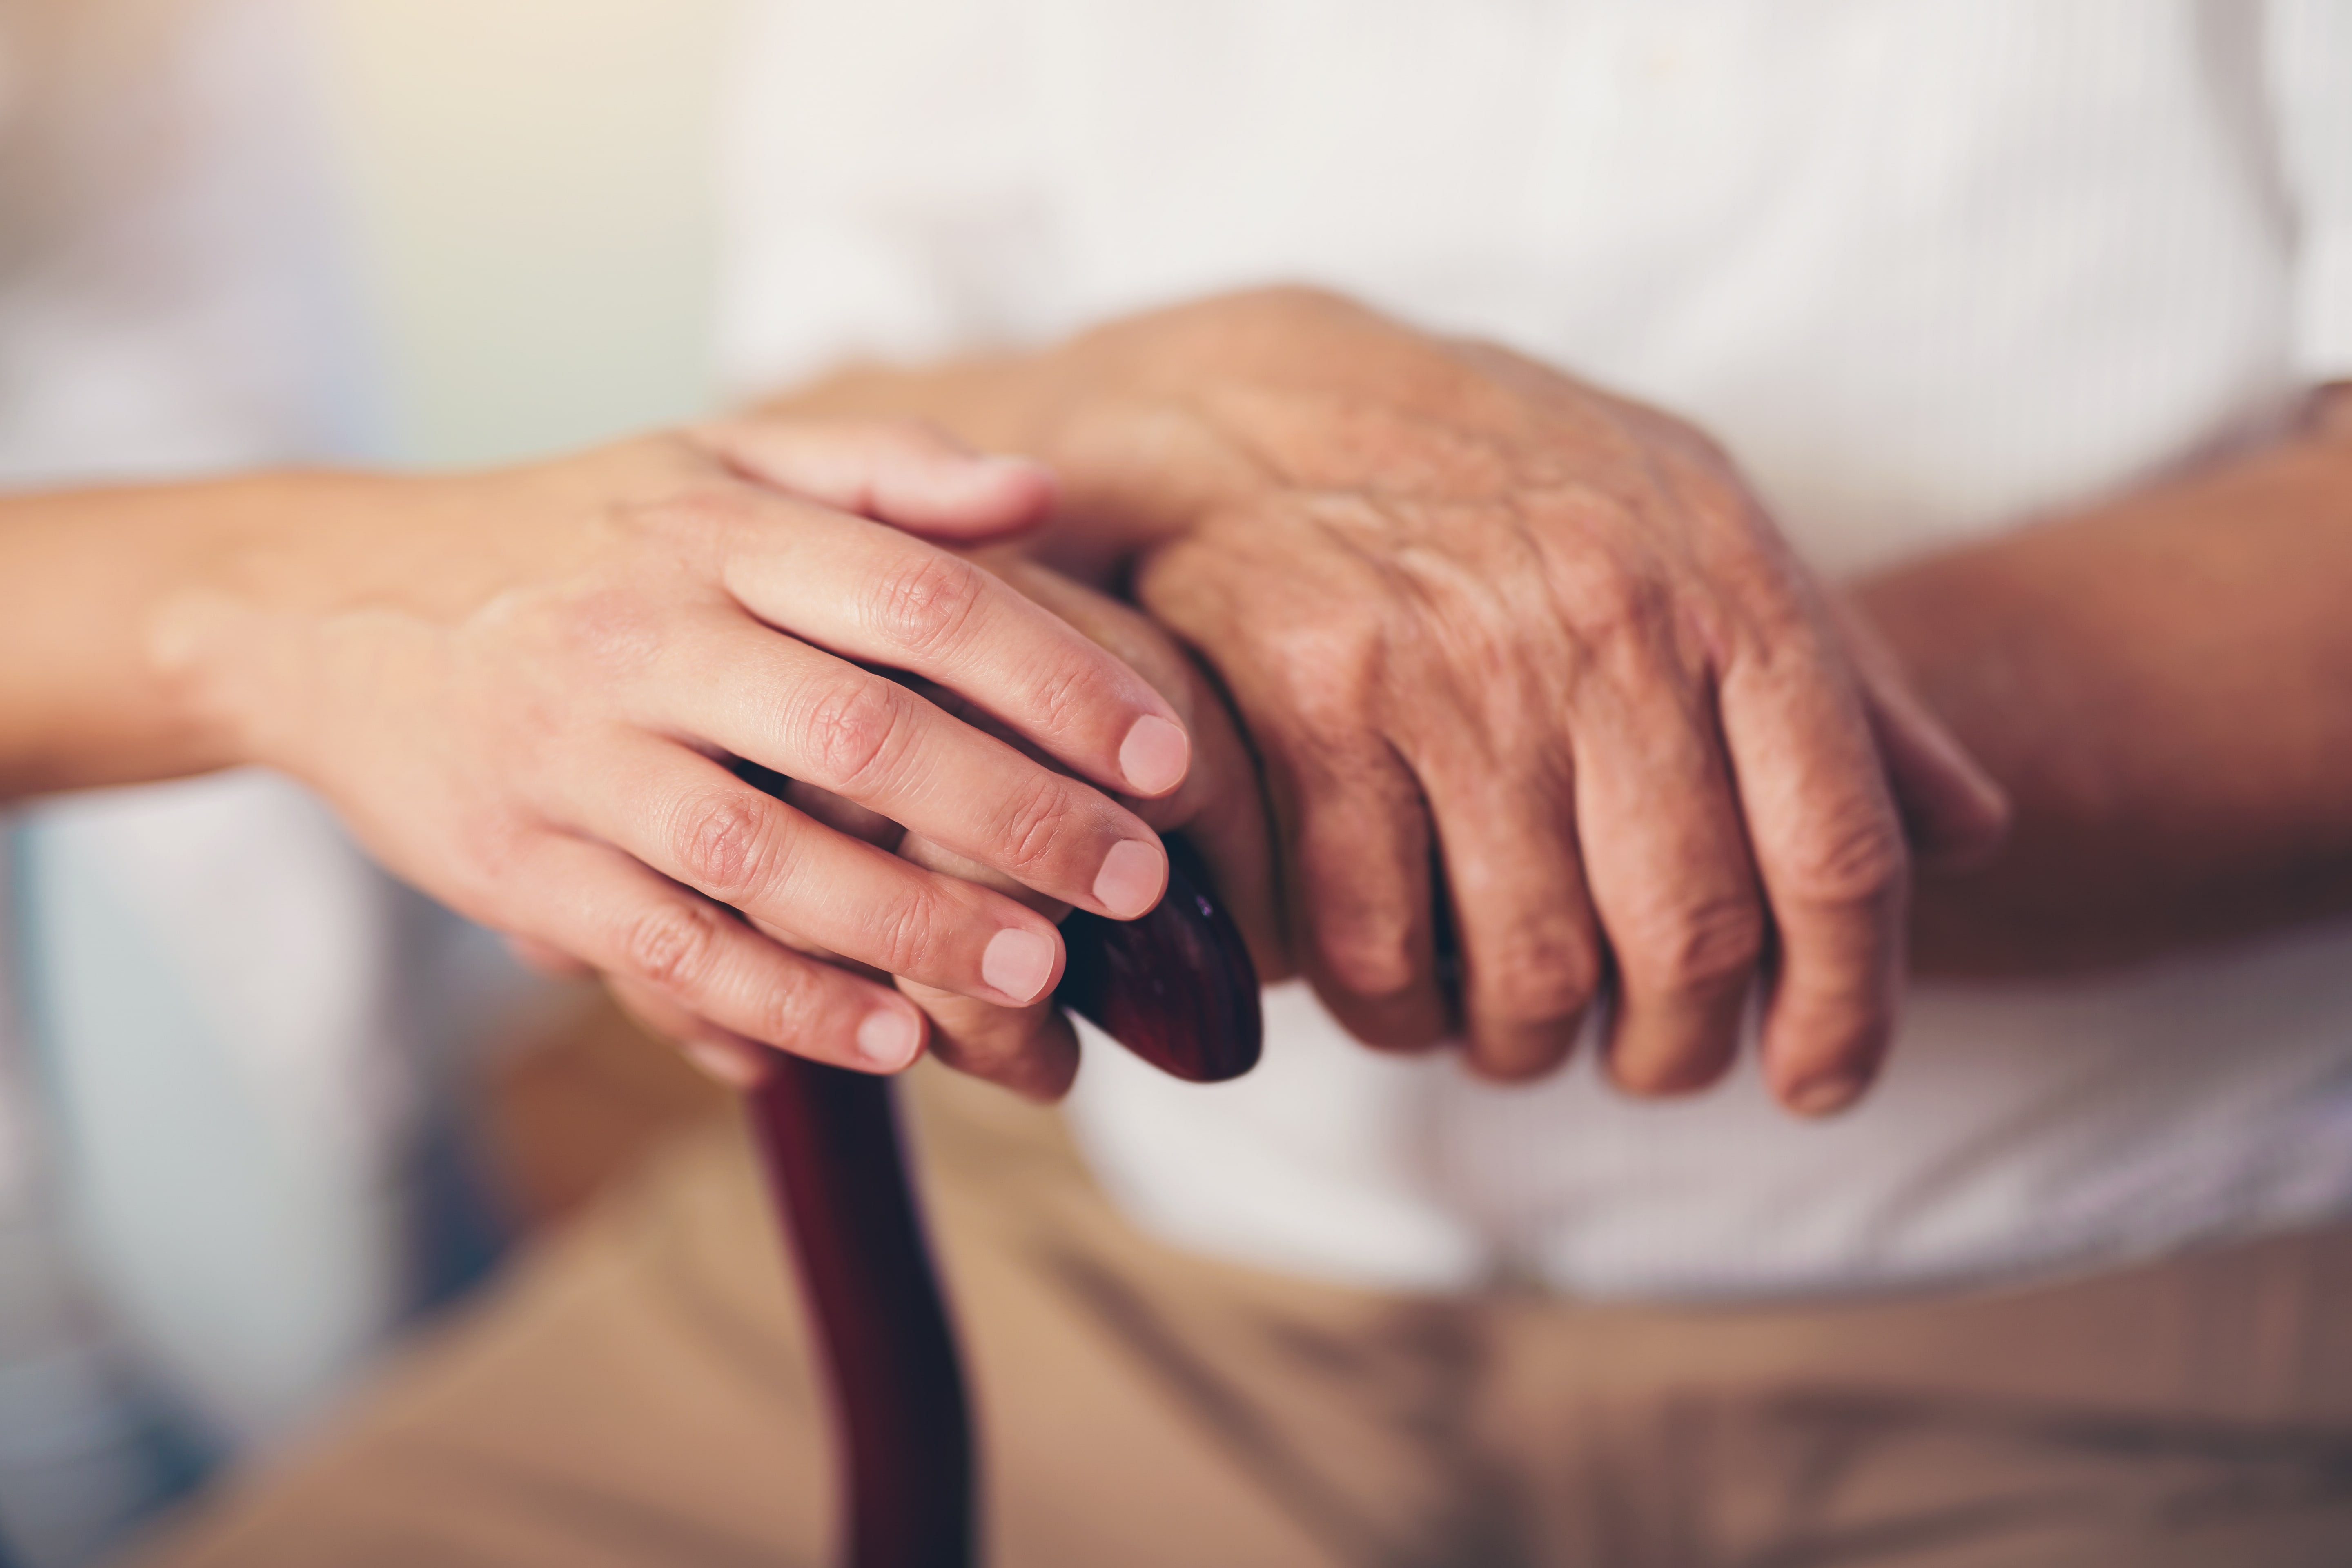 Living well with Parkinson’s: an introduction